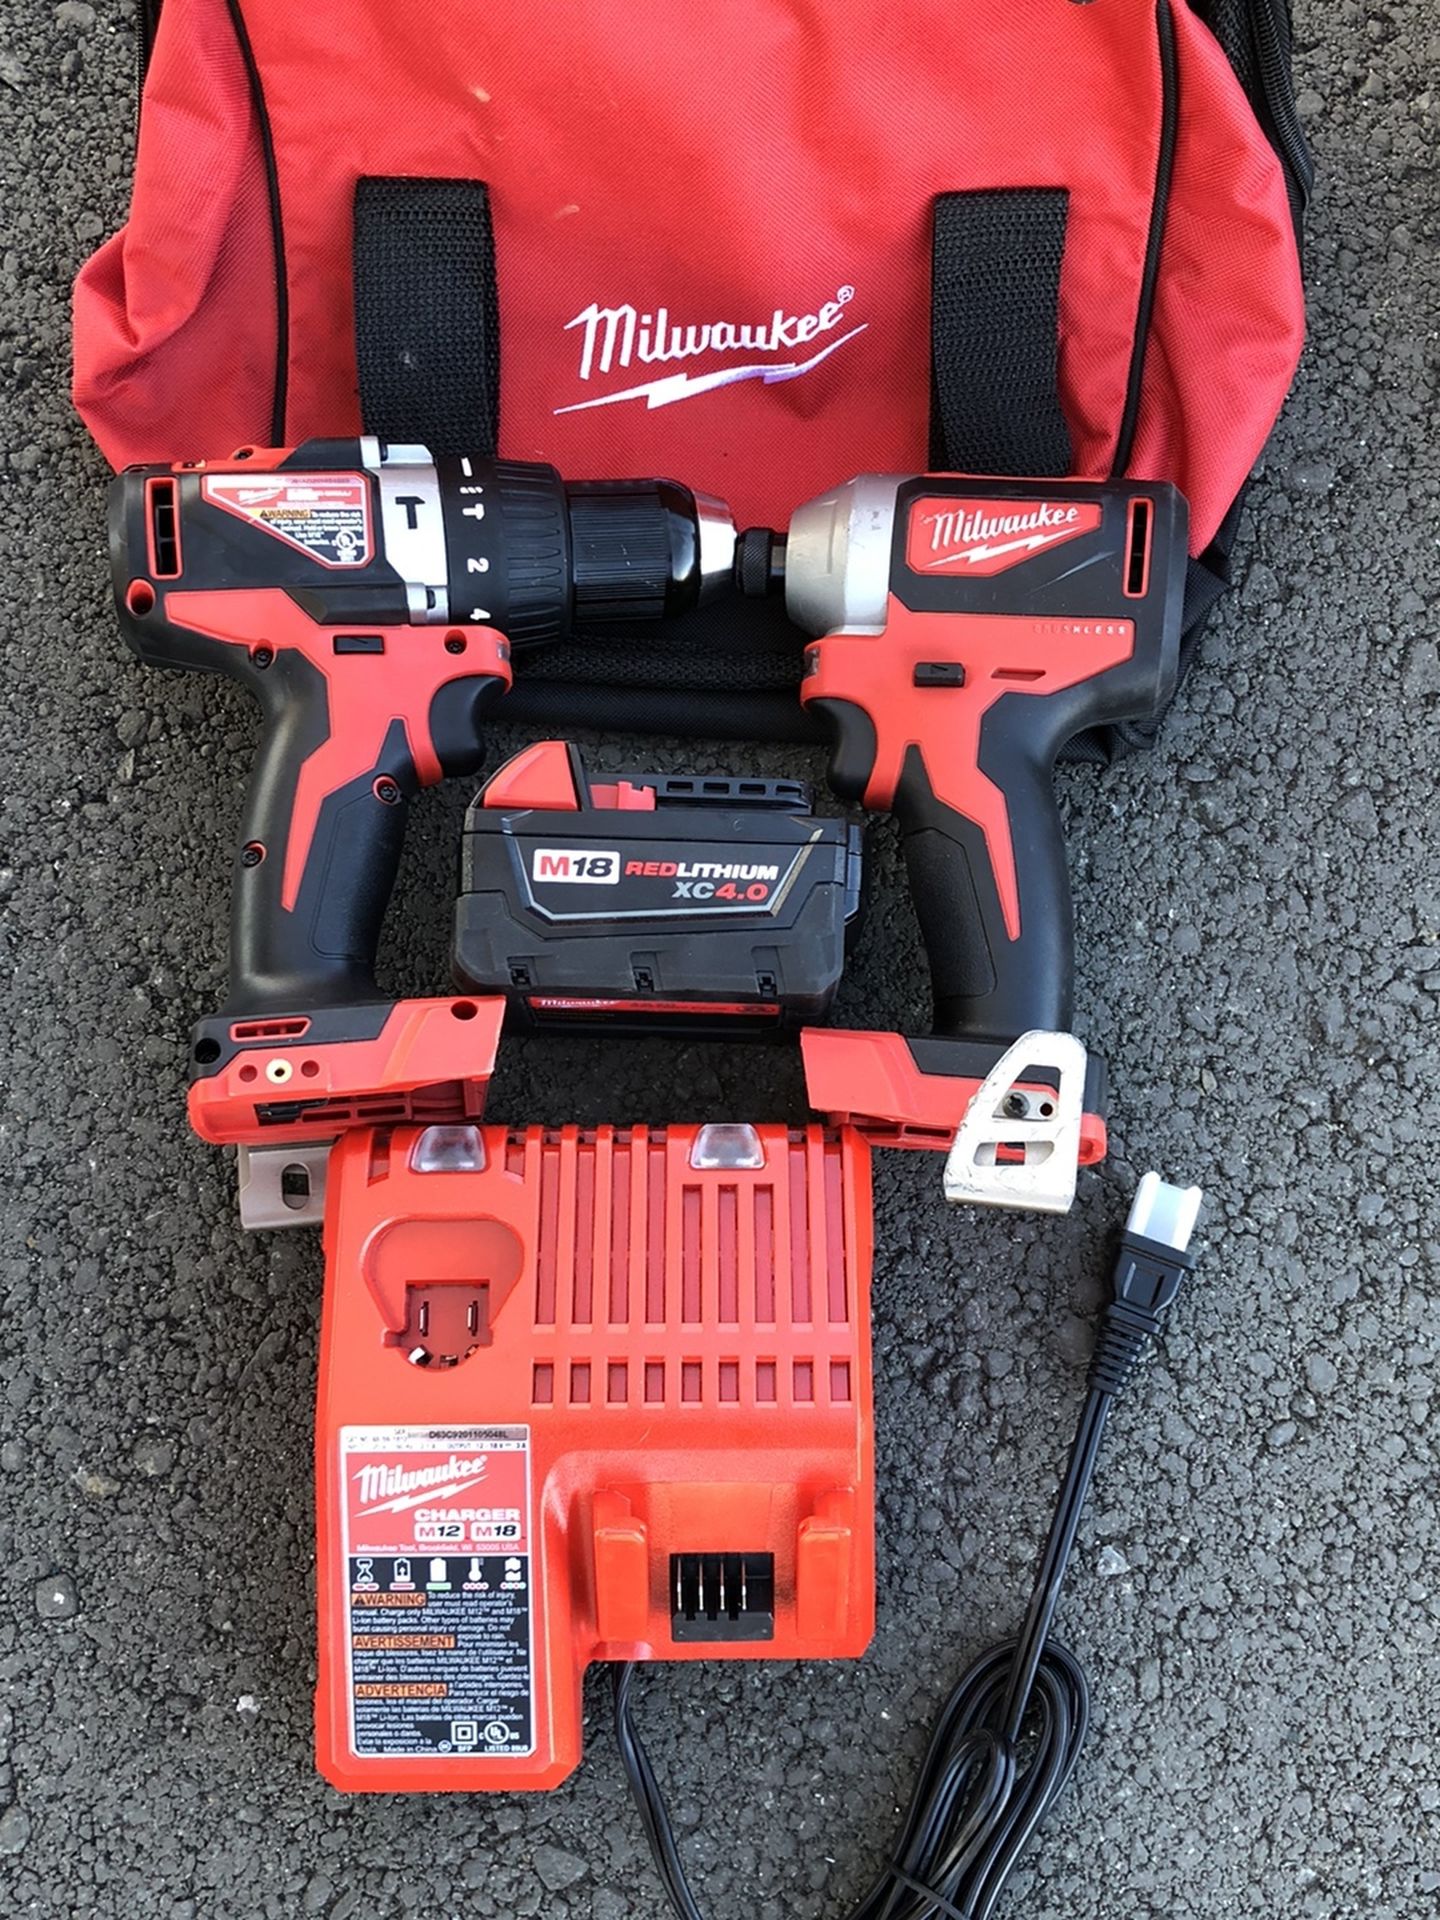 MILWAUKEE COMBO DRILLS WITH ONE BATTERY AND CHARGER BRAND NEW WITH BACKPACK BRAND NEW